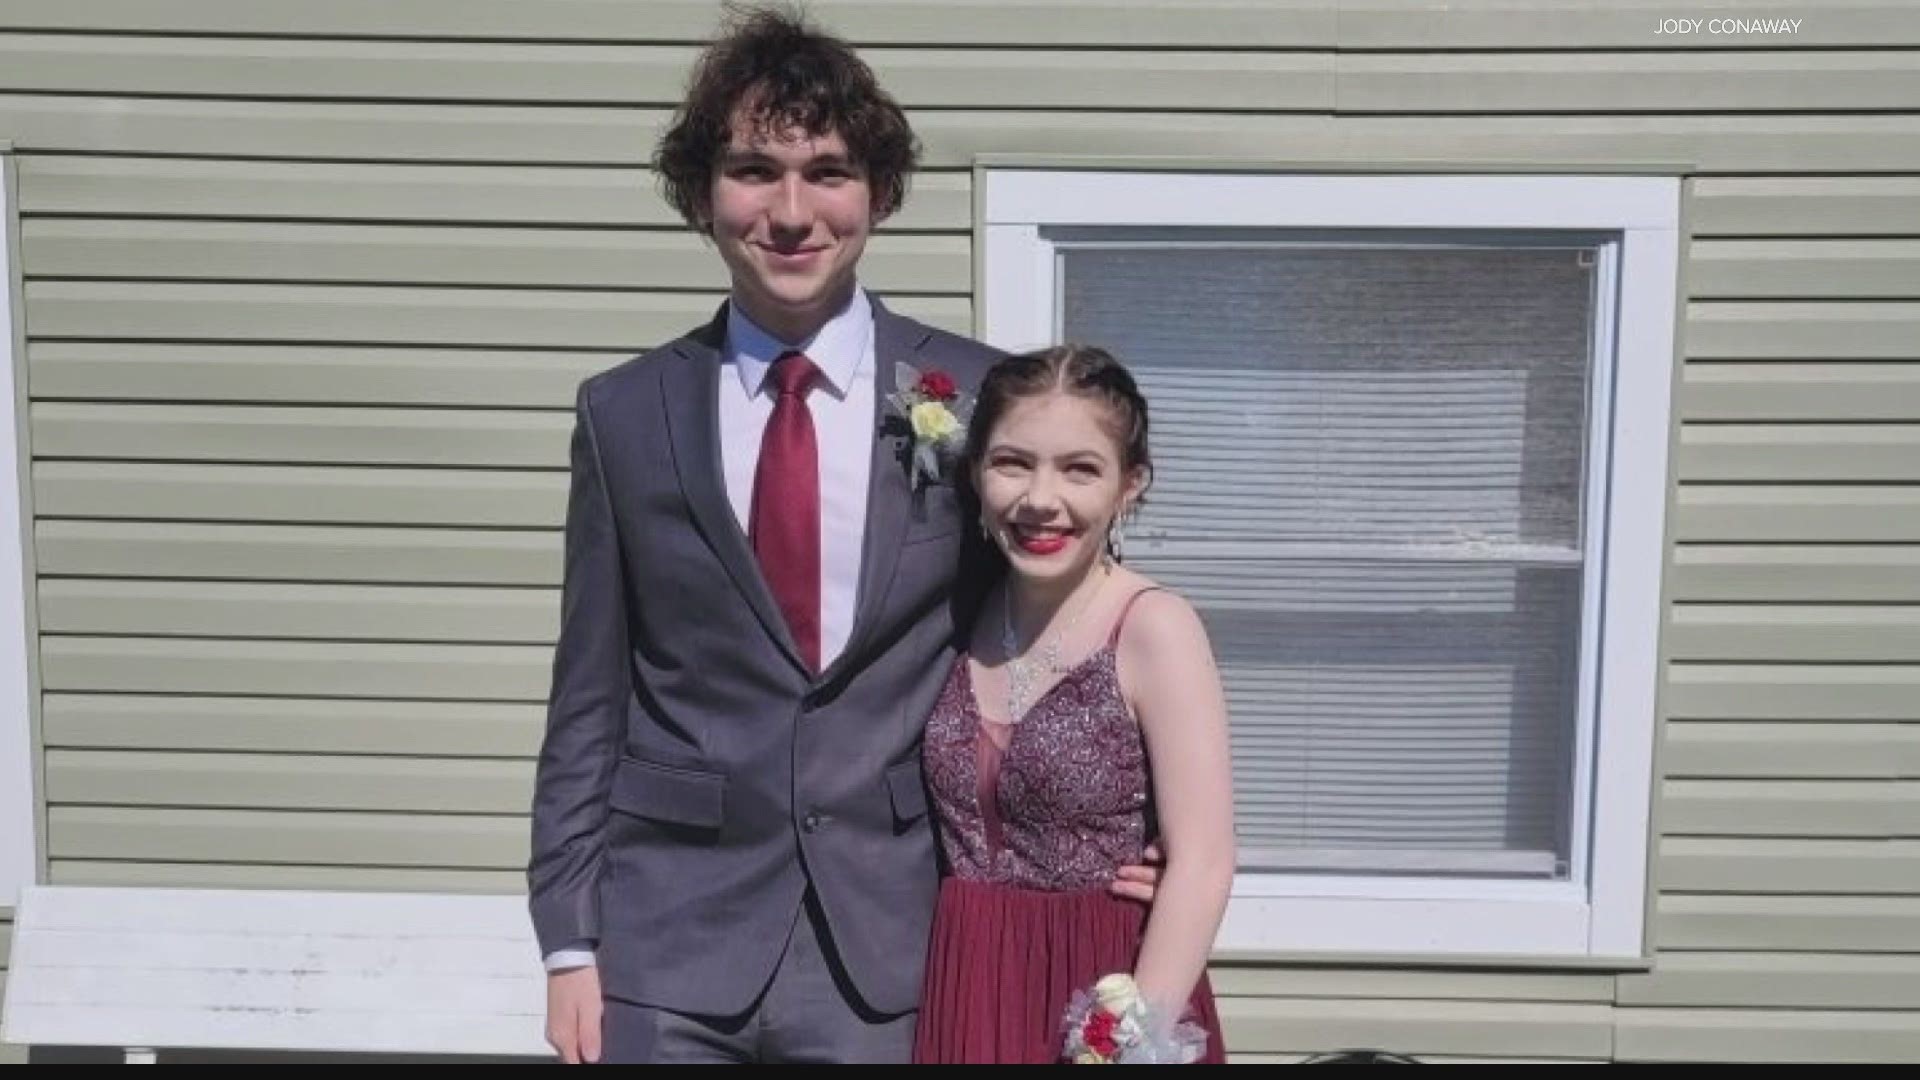 We're hearing from the family of a Hoosier teenager killed over the weekend on her way to prom.